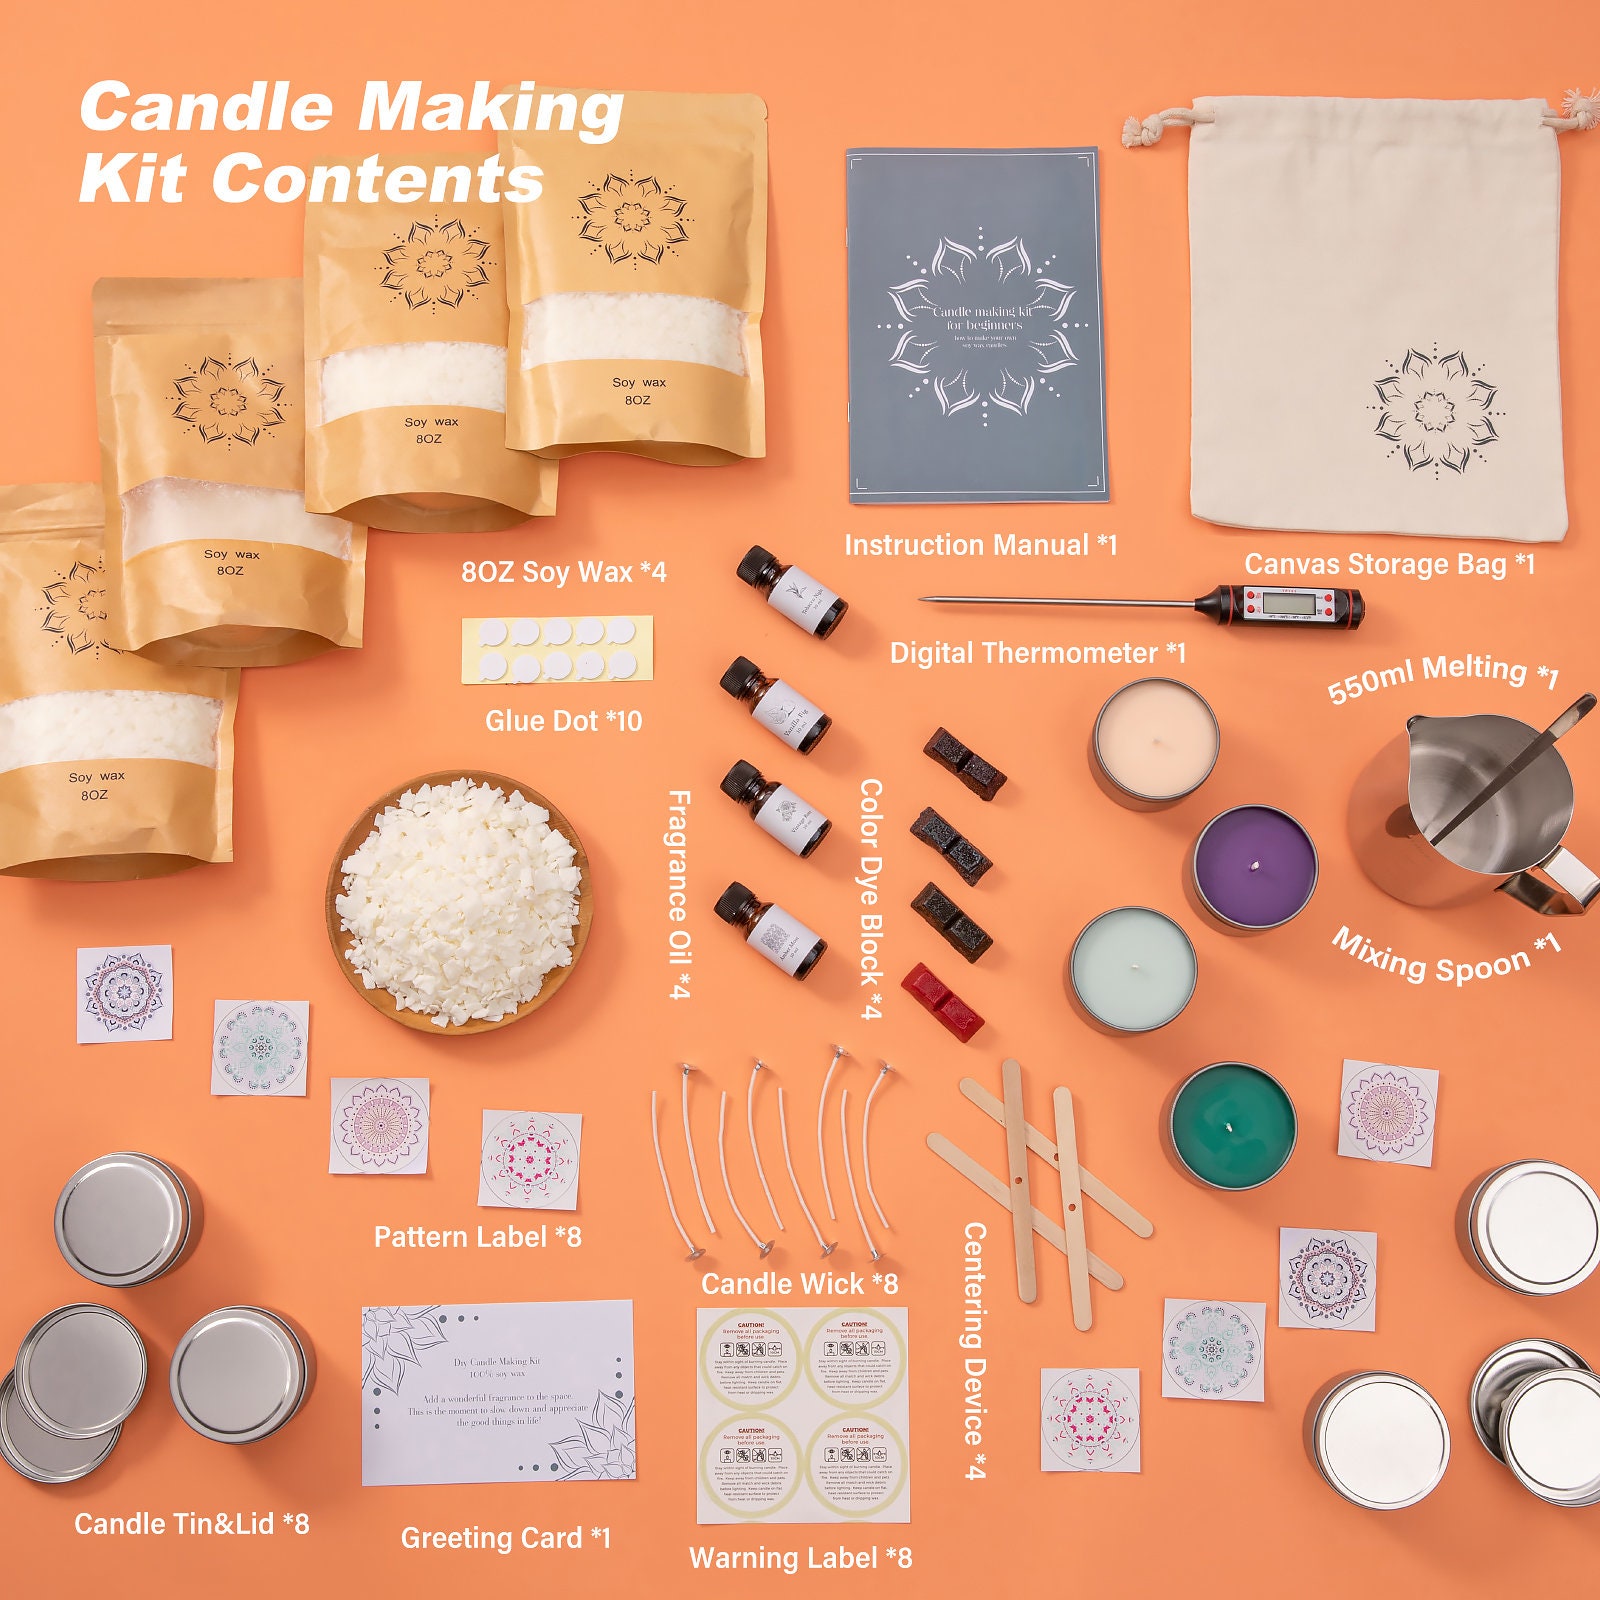 Candle Making Kit, Deluxe Candle Making Supplies, DIY Gifts for Mother's  Day, Including Pouring Pot, Beeswax, Color Dye, Fragrance Oil, Thermometer,  Candle Tins, Molds, Wicks, Stickers, Wicks Holders